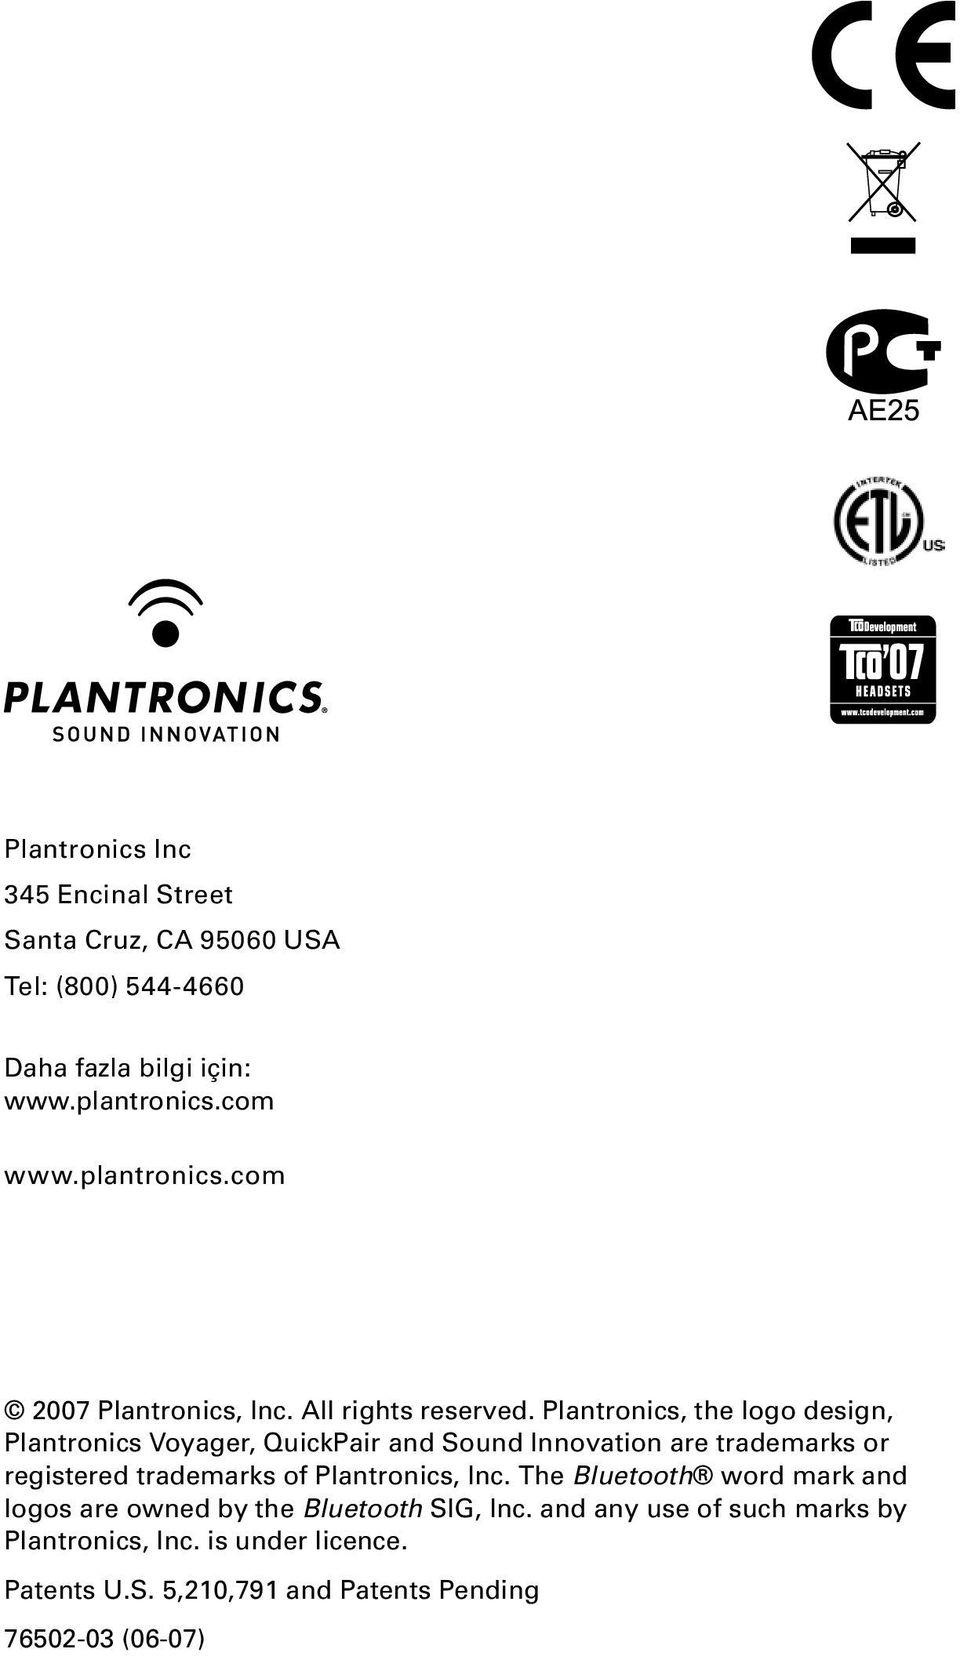 Plantronics, the logo design, Plantronics Voyager, QuickPair and Sound Innovation are trademarks or registered trademarks of